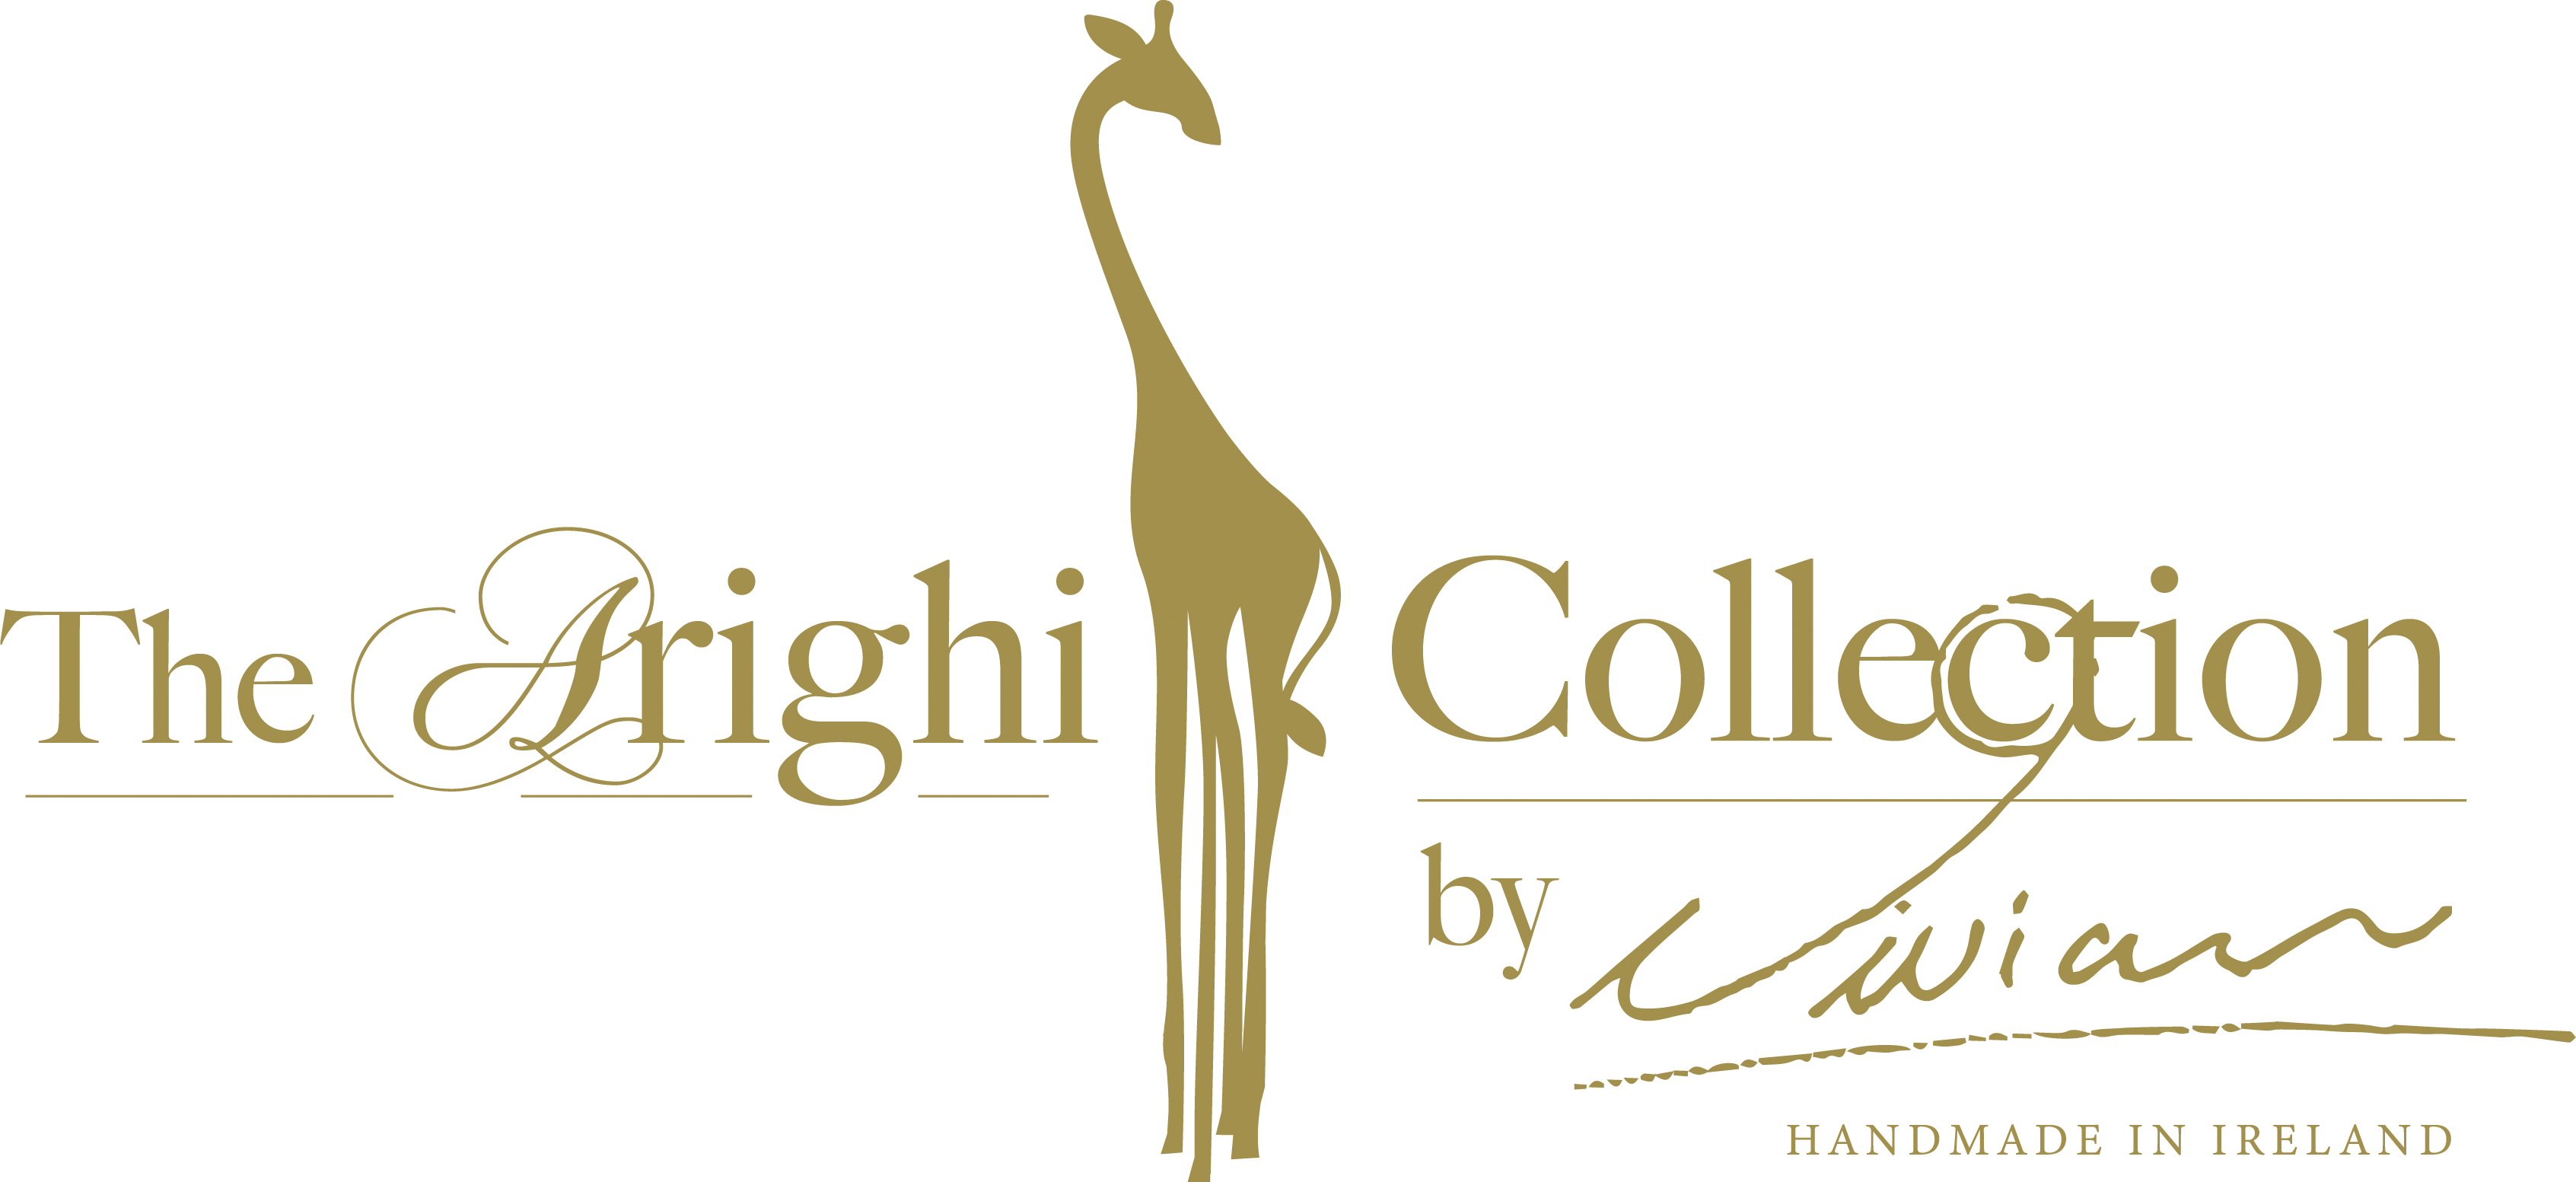 The Arighi Collection